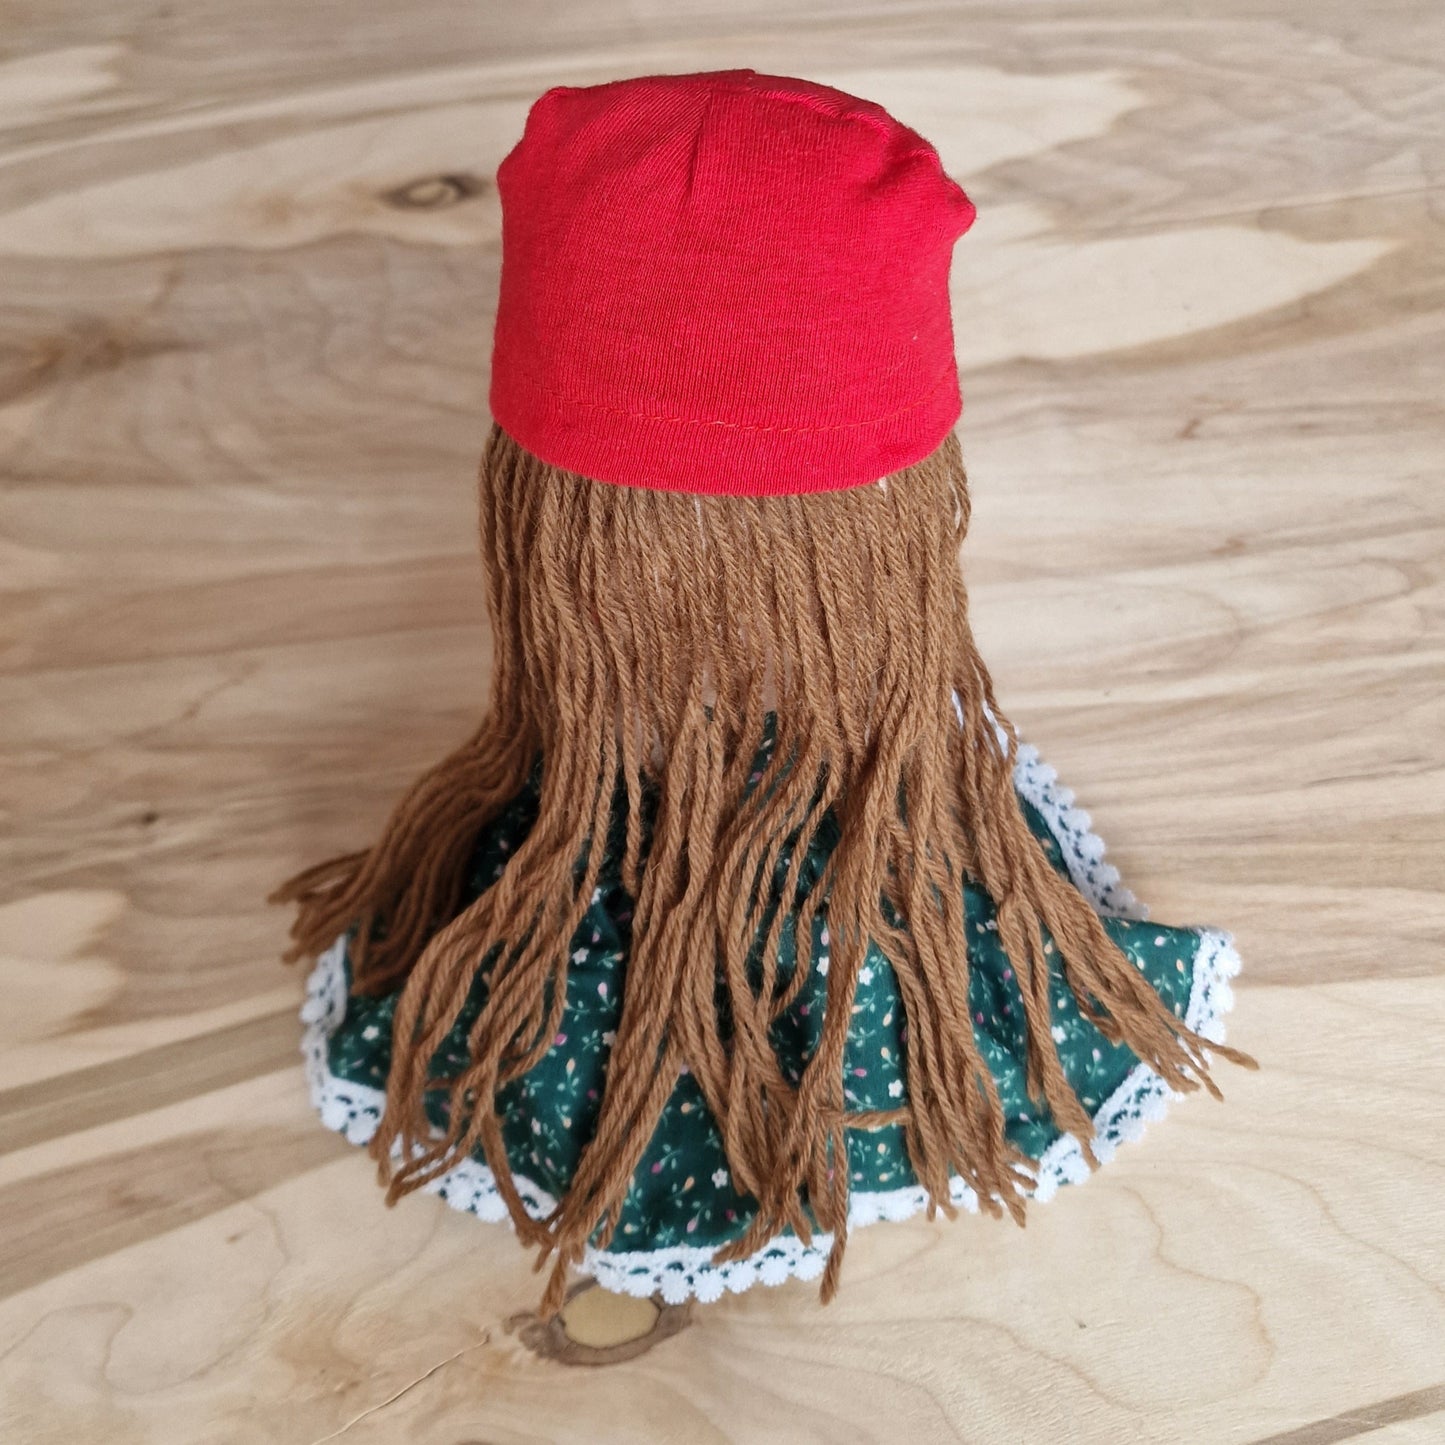 Hand-sewn cotton doll with a red hat (IRVI 1)